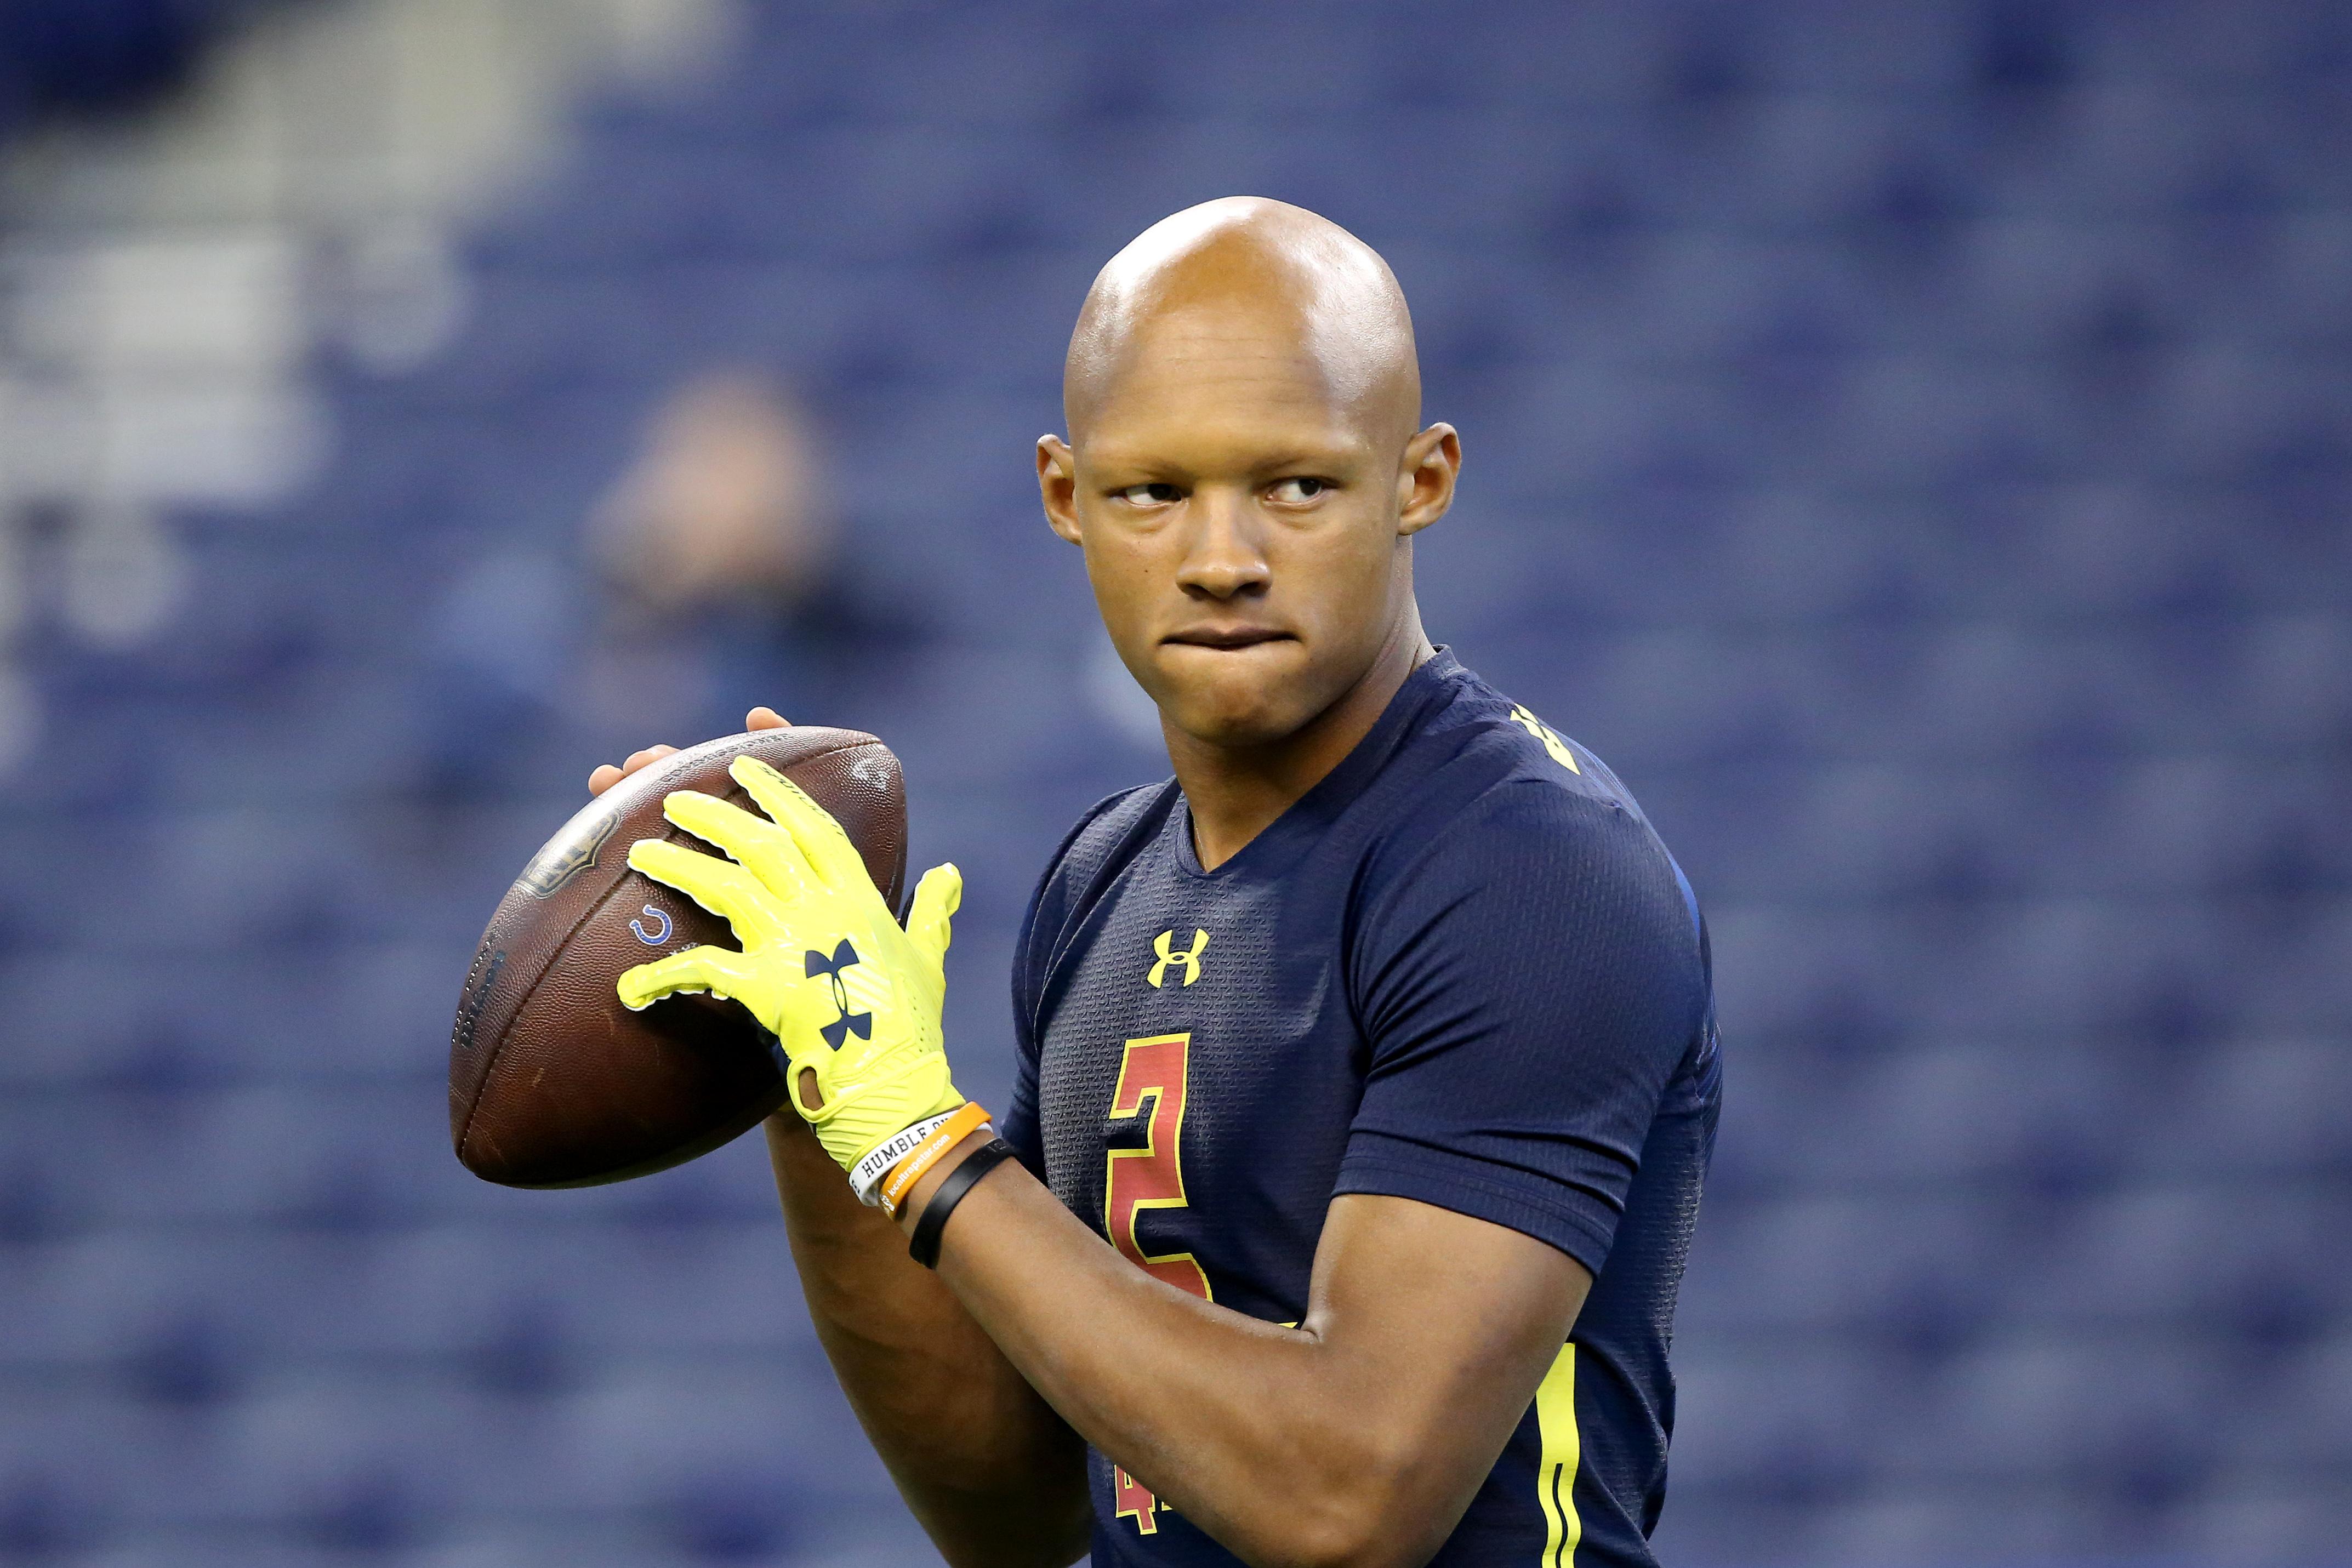 Browns signing former Steelers QB Josh Dobbs to 1-year deal